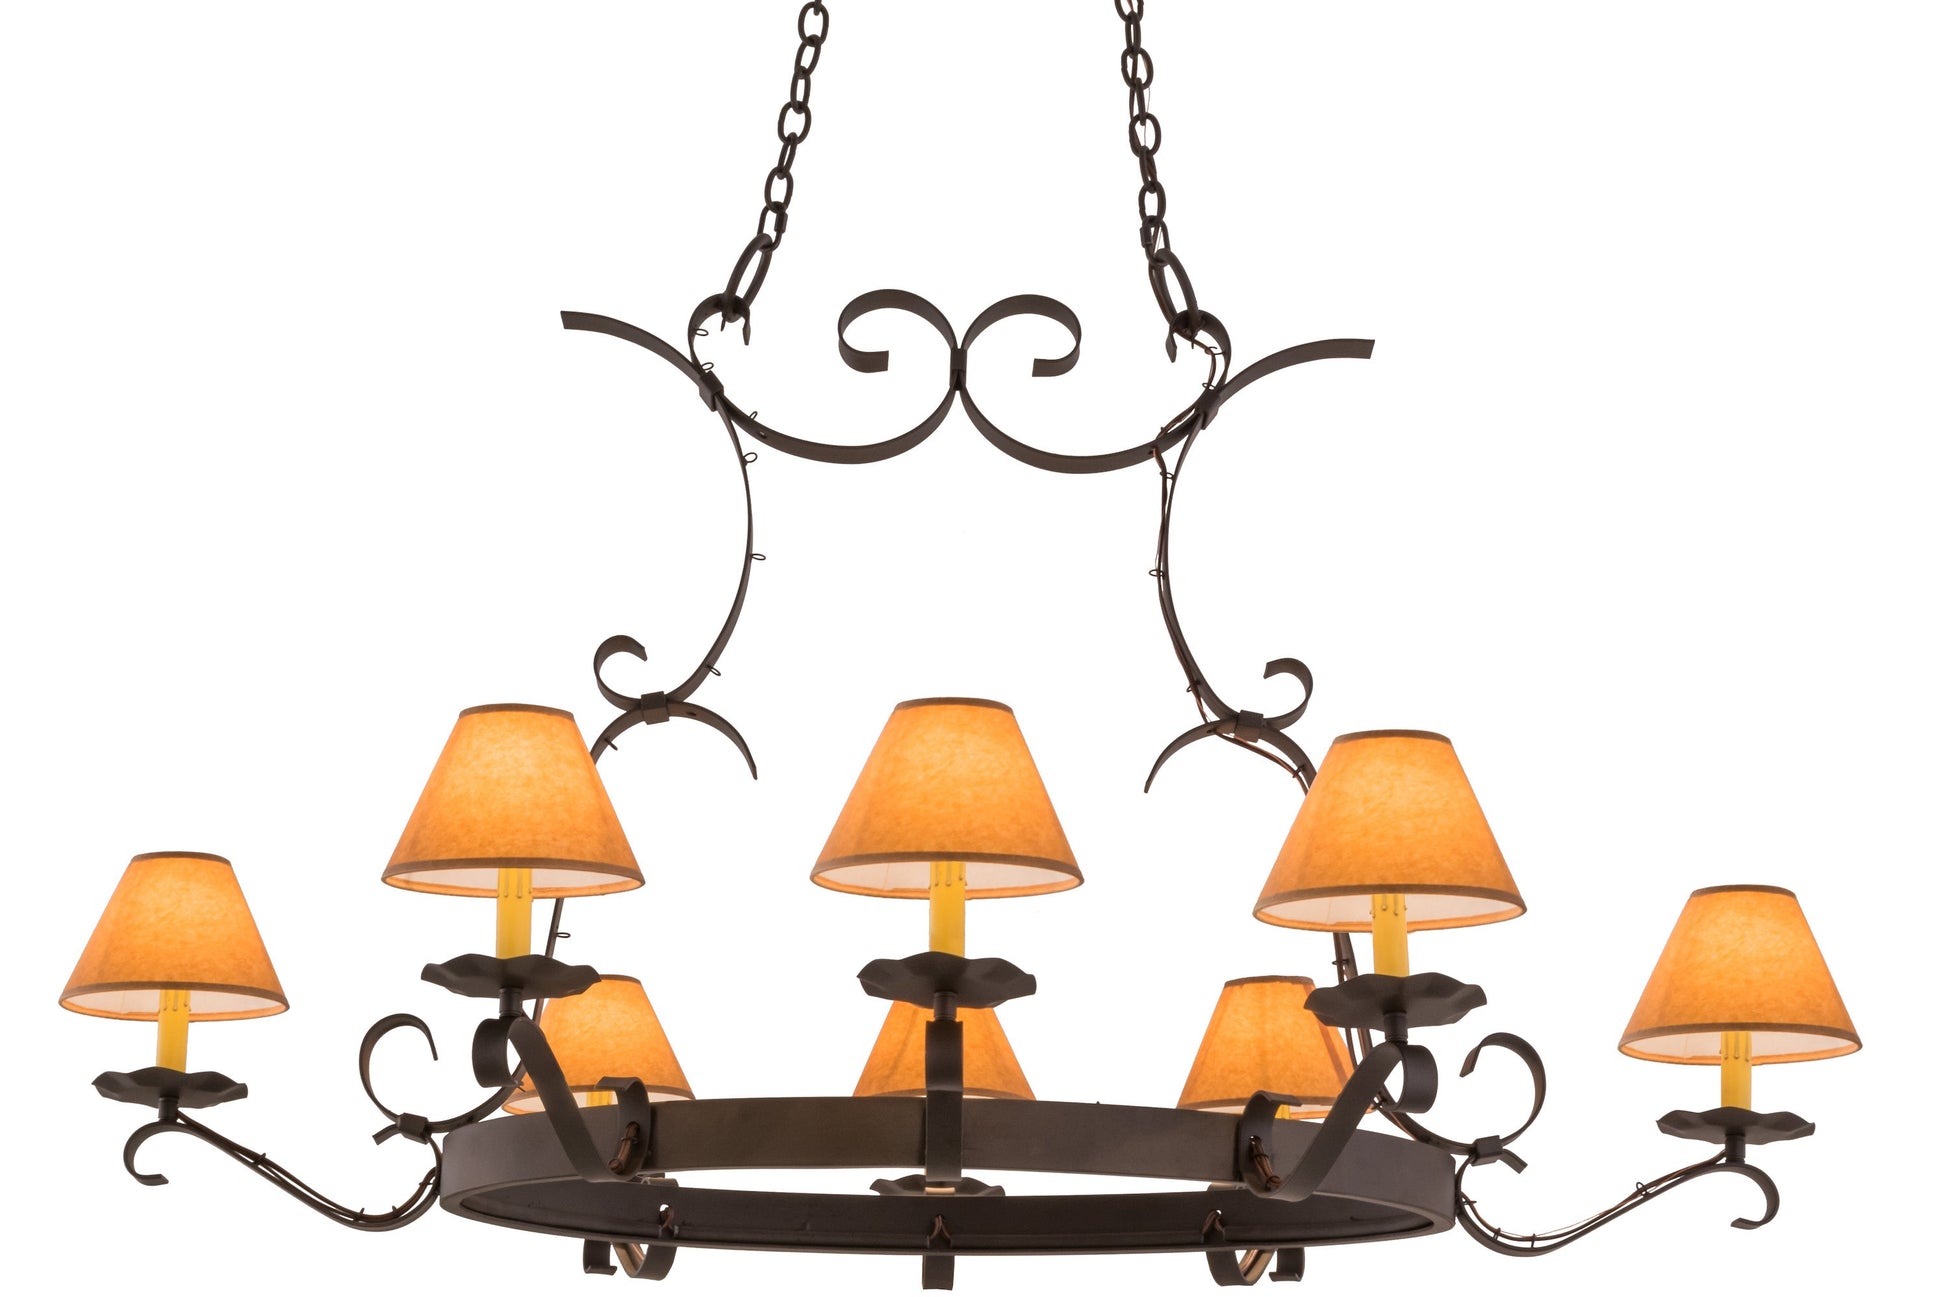 53" Long Handforged 8-Light Oblong Chandelier by 2nd Ave Lighting